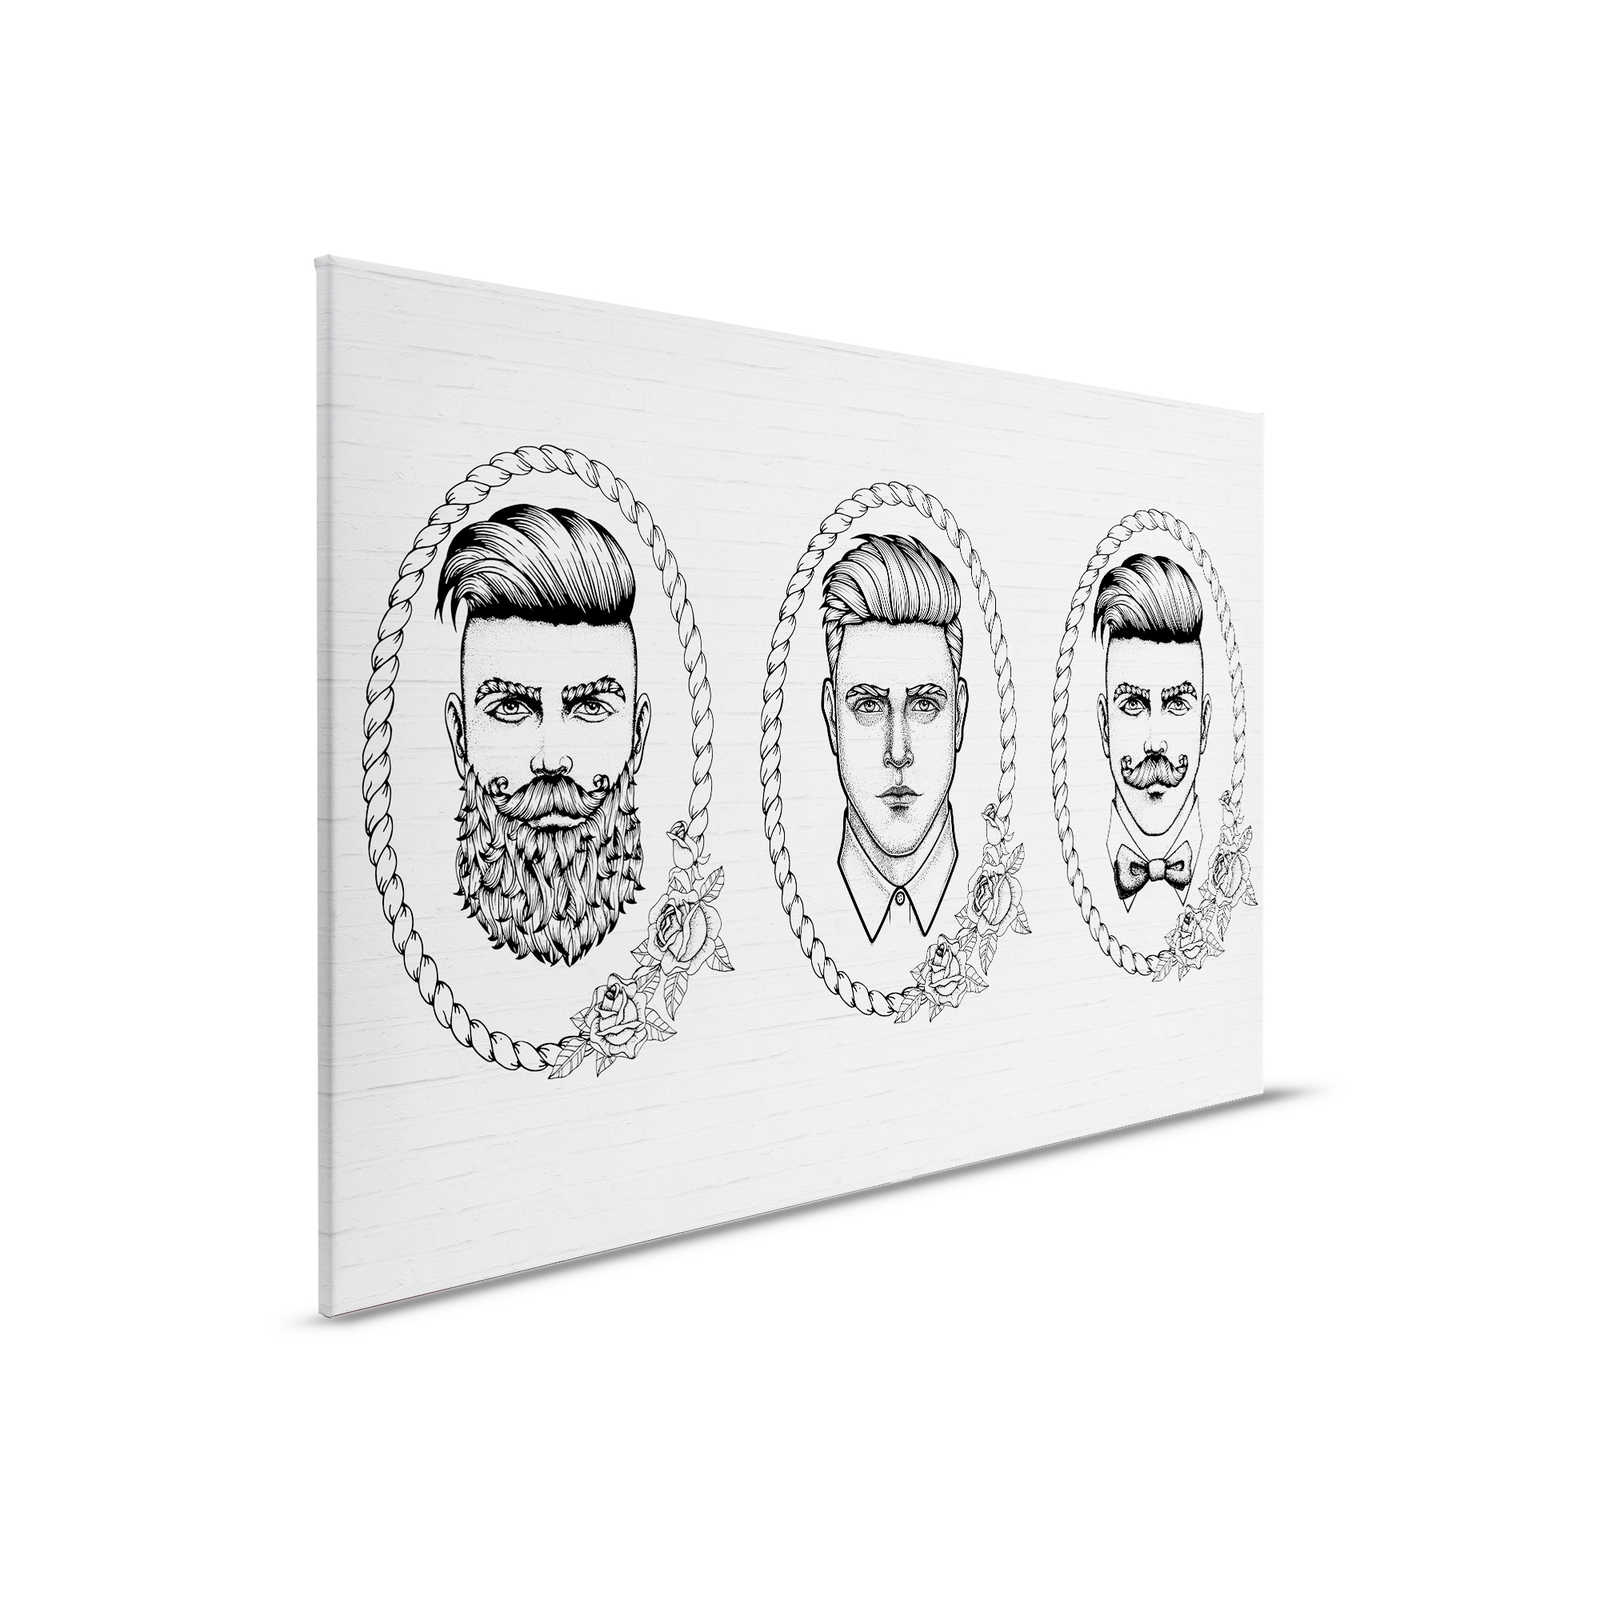         Black and white canvas painting with men portraits in comic style - 0.90 m x 0.60 m
    